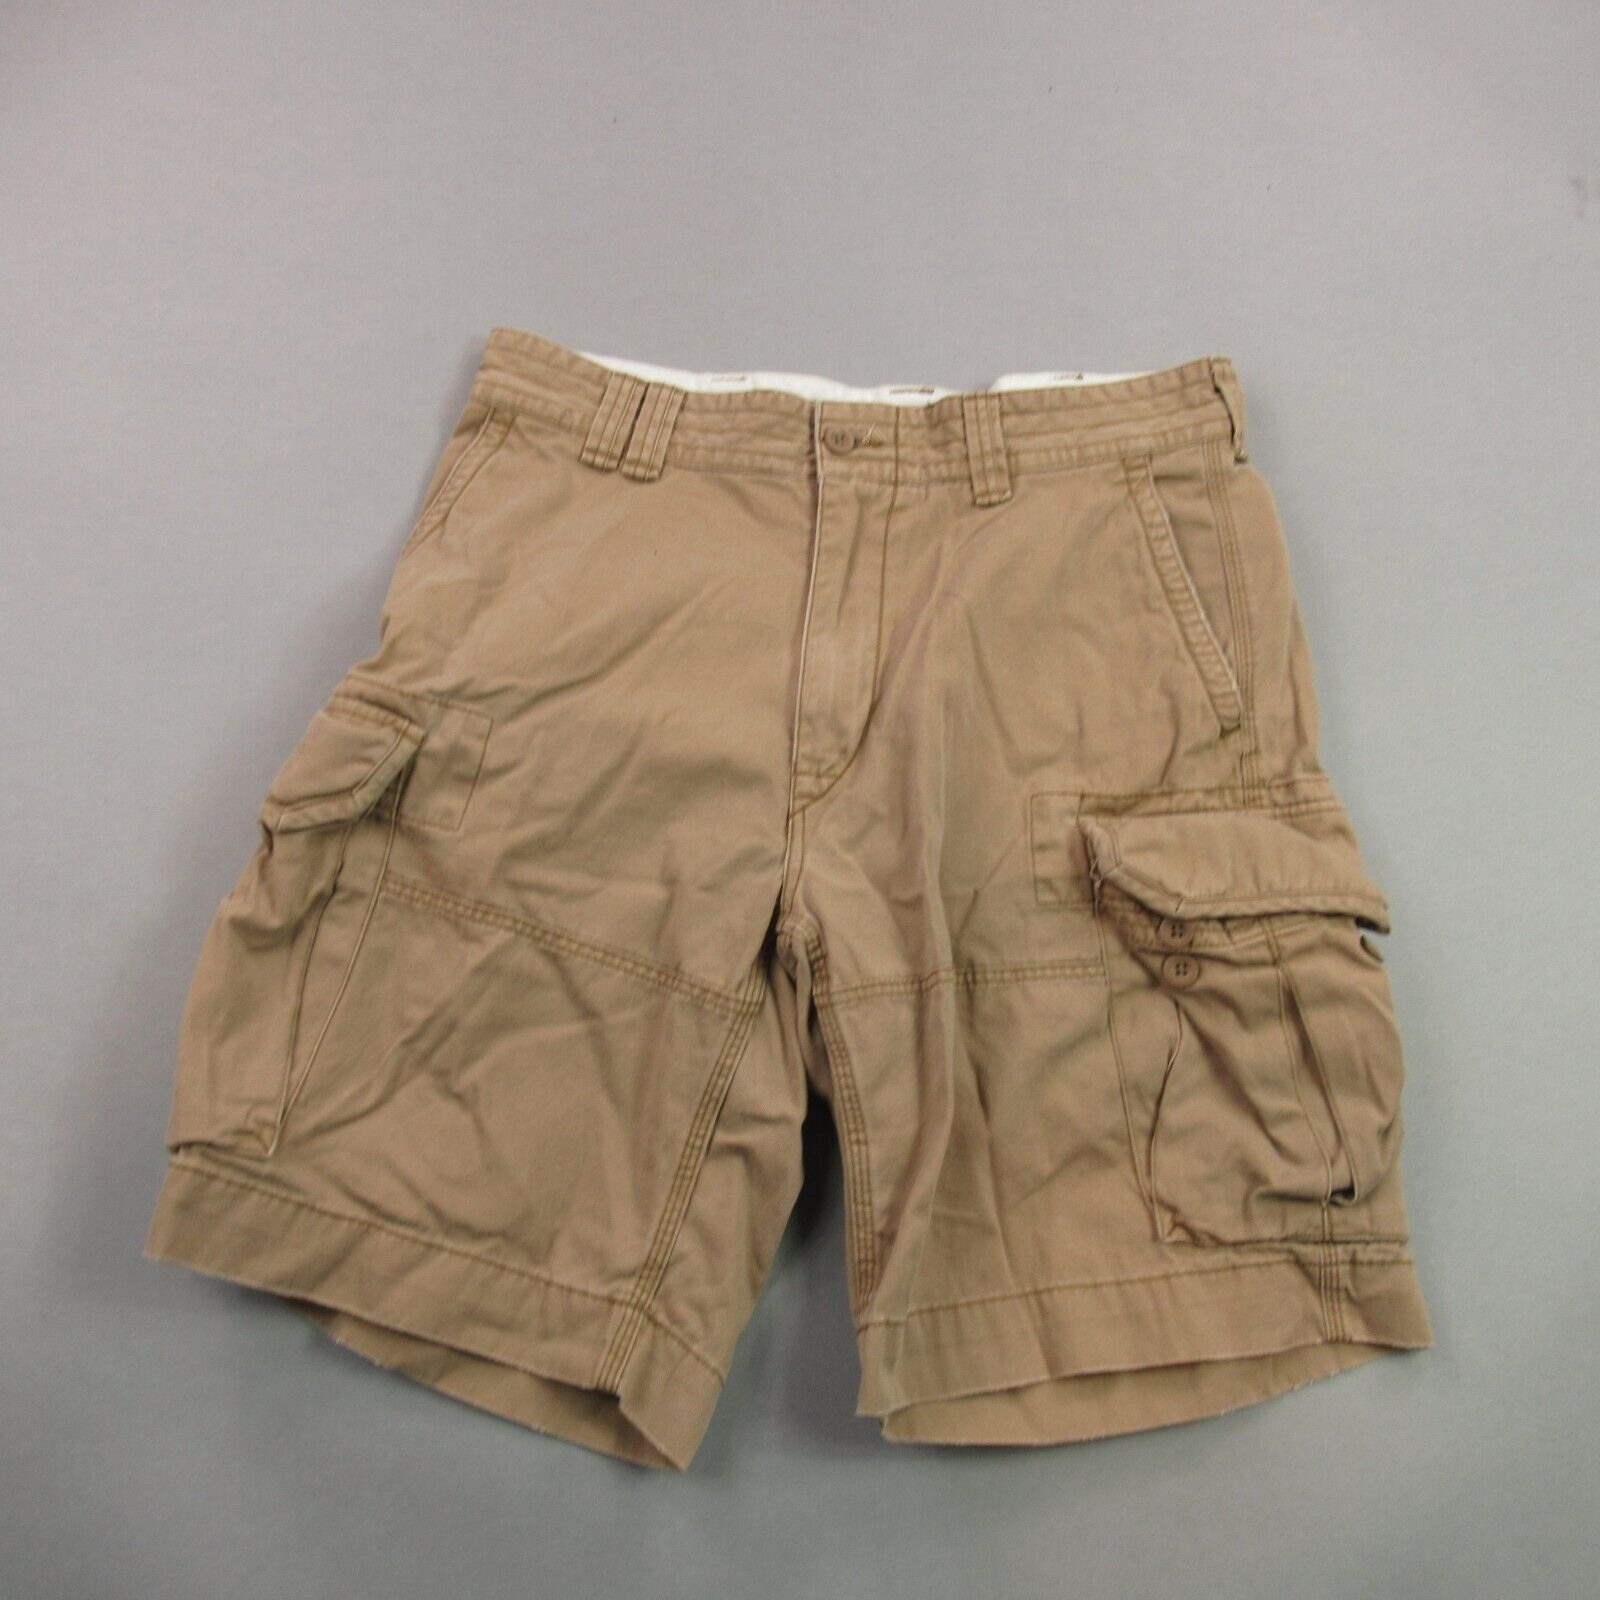 Polo Ralph Lauren Shorts Mens 35 Cargo Pockets Adult Fit Outdoors Pony